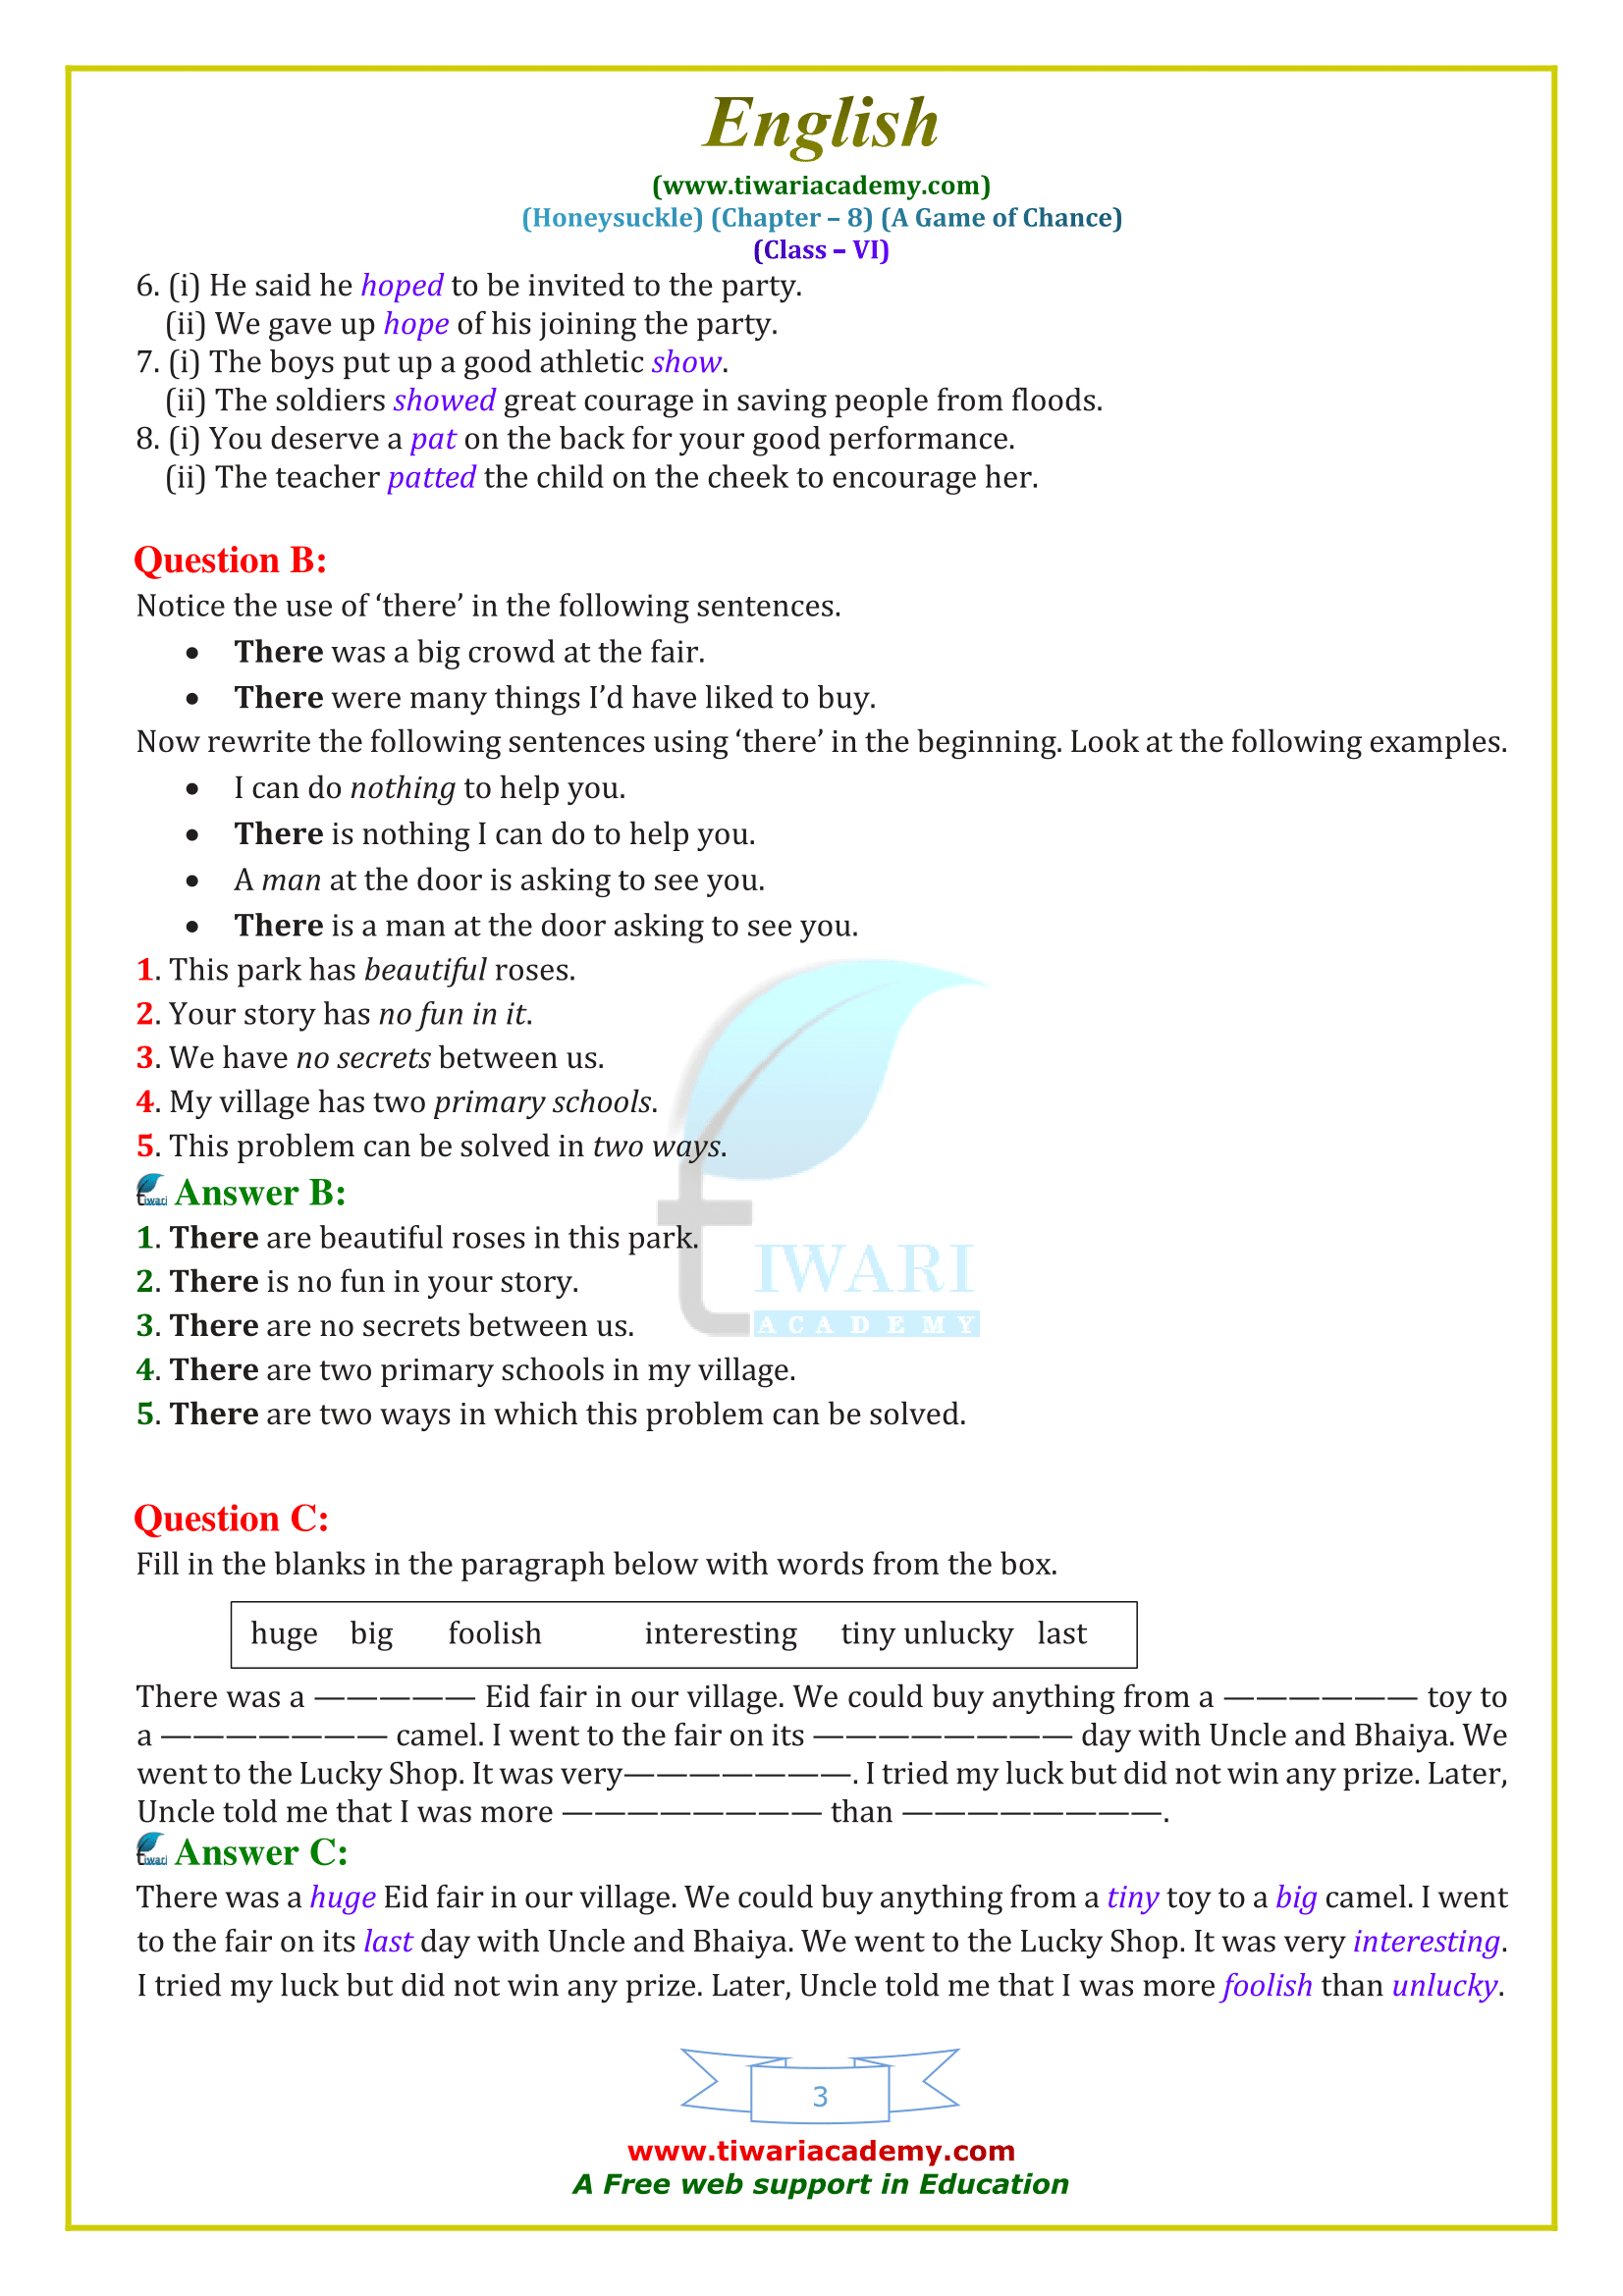 NCERT Solutions for Class 6 English Honeysuckle Chapter 8 updated for 2019-20